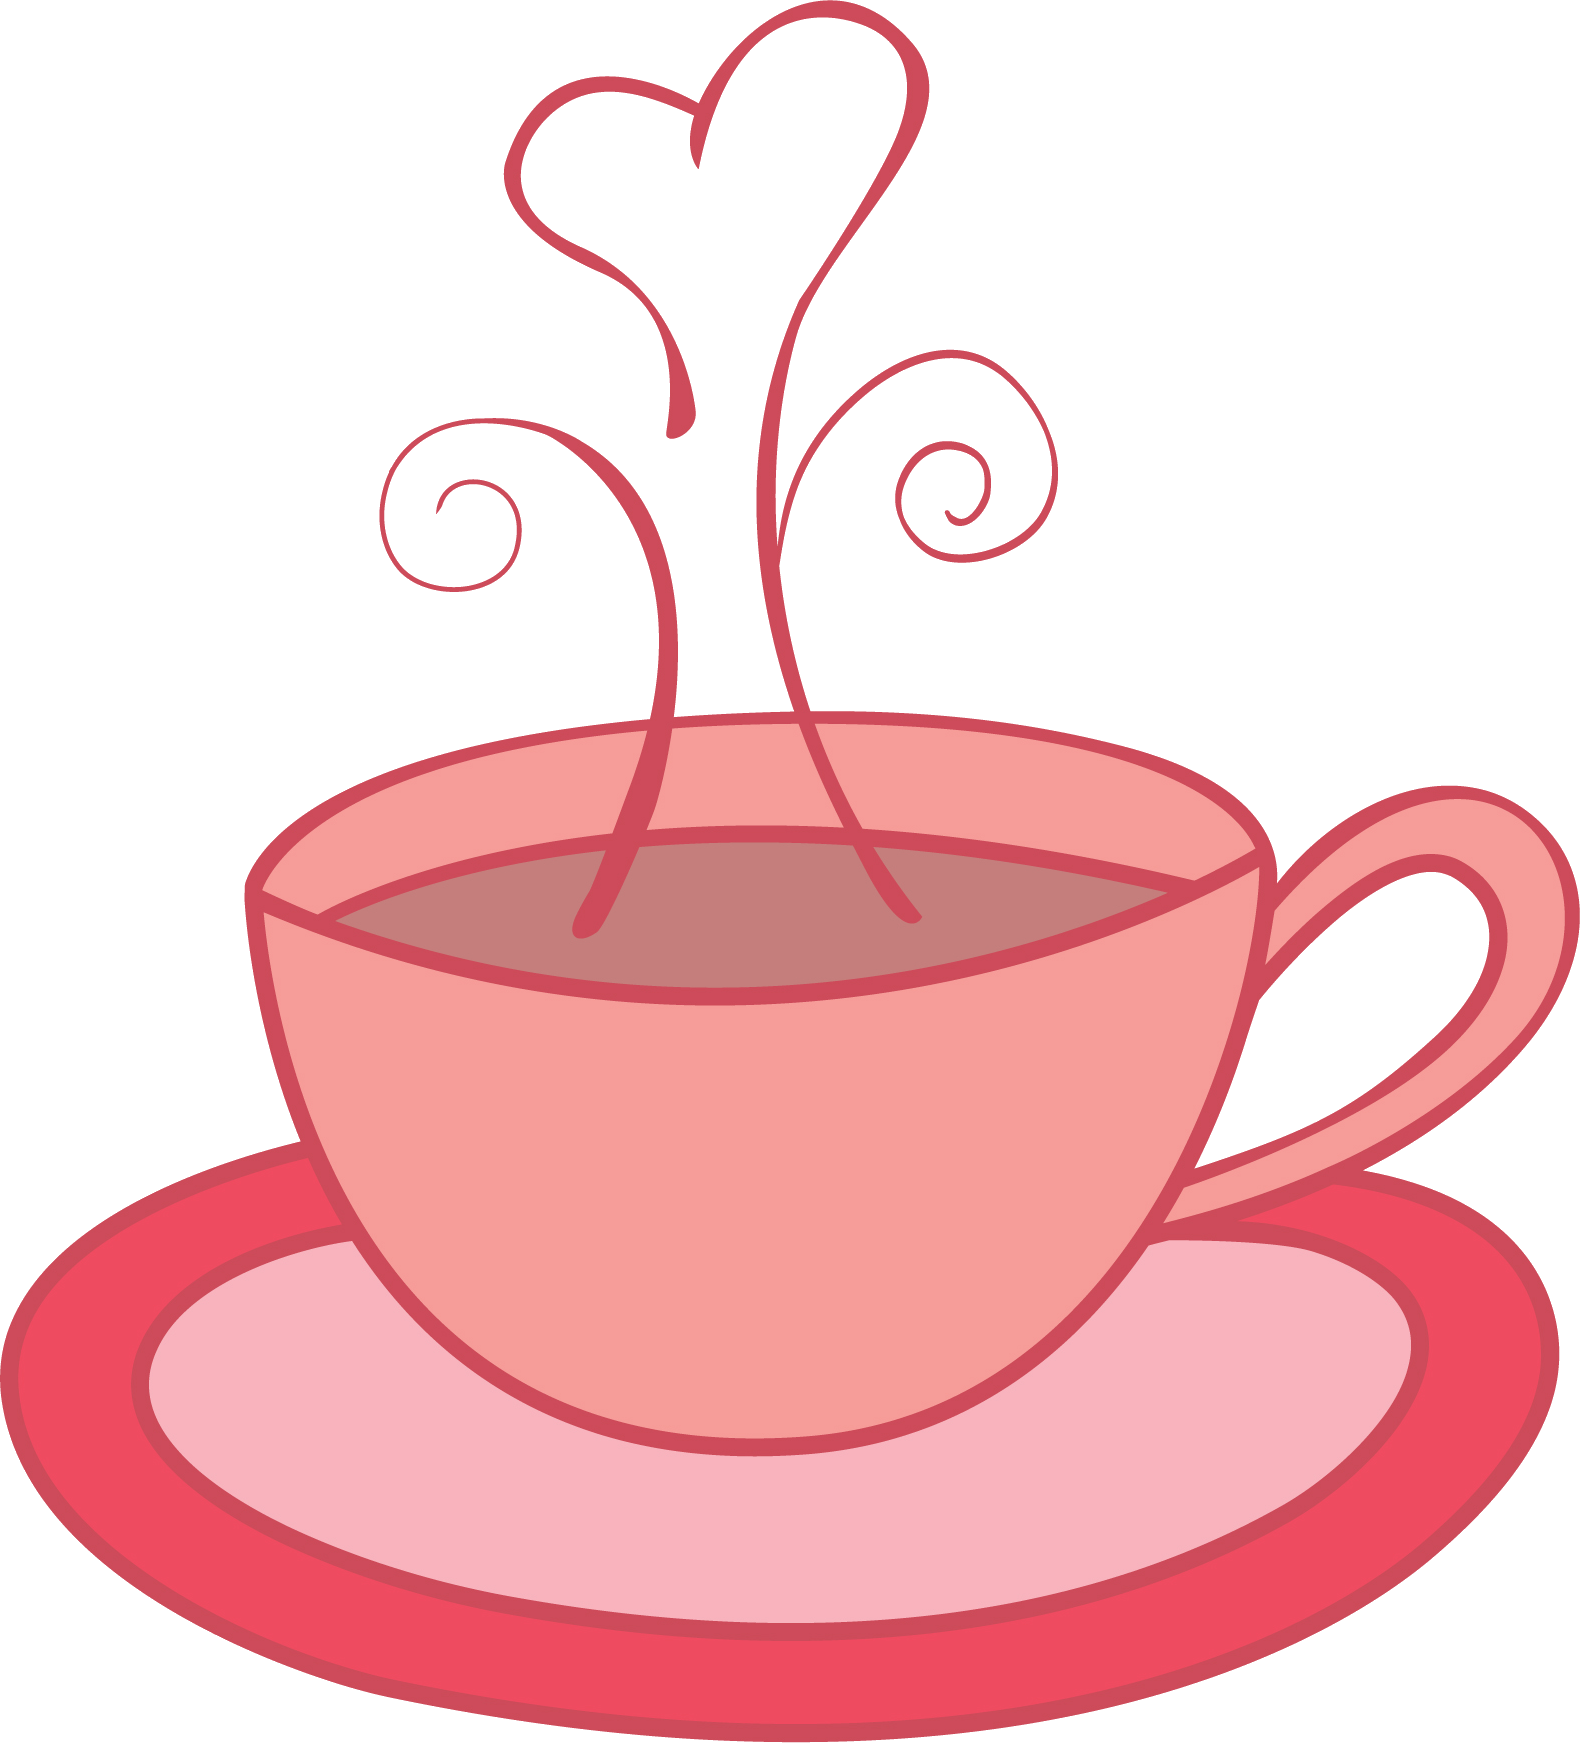 Free Red Teacup Cliparts, Download Free Clip Art, Free ...